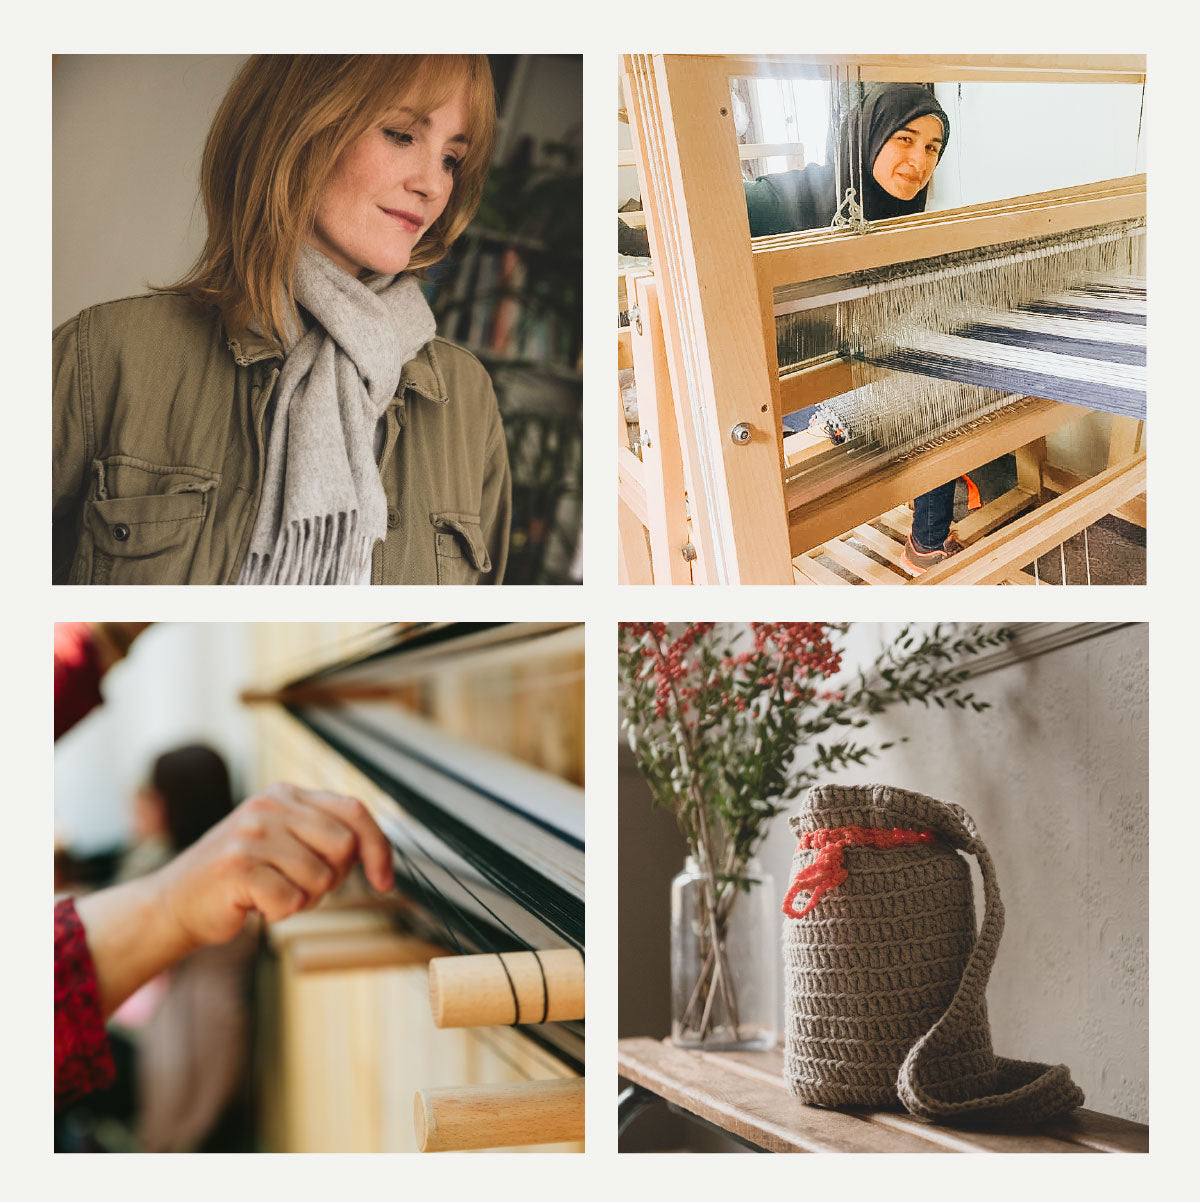 Grid of 4 images: 1 - A woman with ginger hair wears a Love Welcomes light grey cashmere scarf around her neck with an olive green jacket. 2- A Love Welcomes woman who is a refugee peers at the camera through a weaving loom, wearing a headscarf. 3 - A close up of a Love Welcomes woman's hand preparing the materials for weaving. 4 - A Love Welcomes hand crocheted bag in brown with orange tie. 